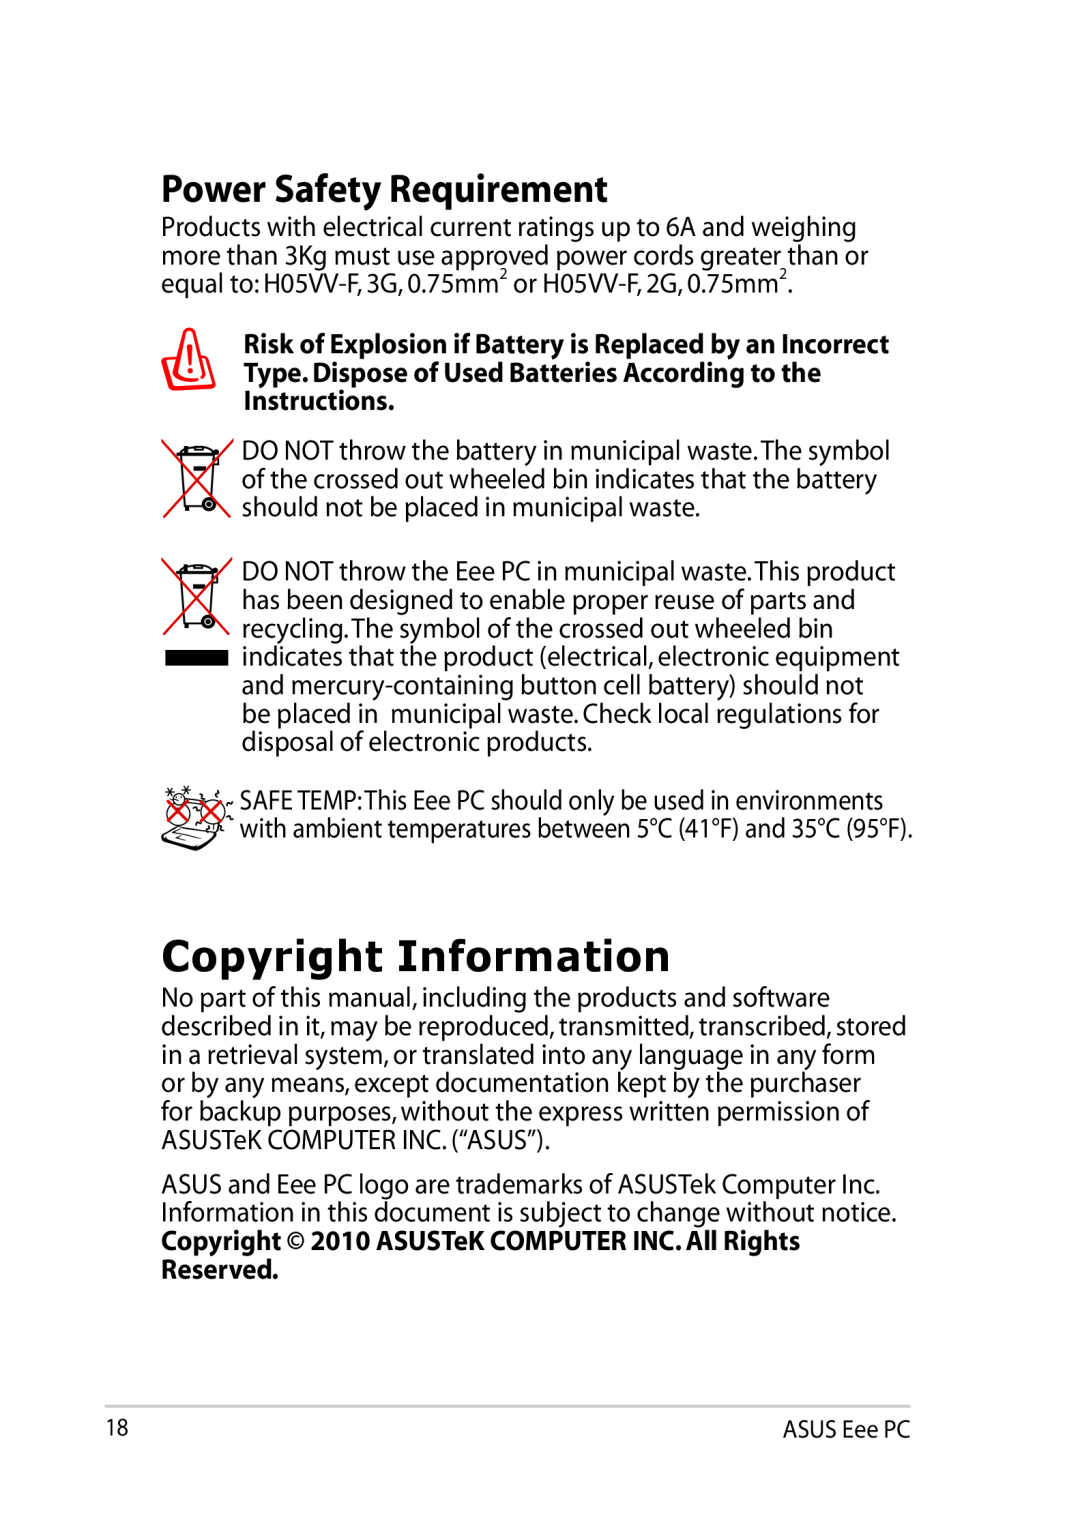 Asus 900AX Copyright Information, Power Safety Requirement, Copyright 2010 ASUSTeK COMPUTER INC. All Rights Reserved 